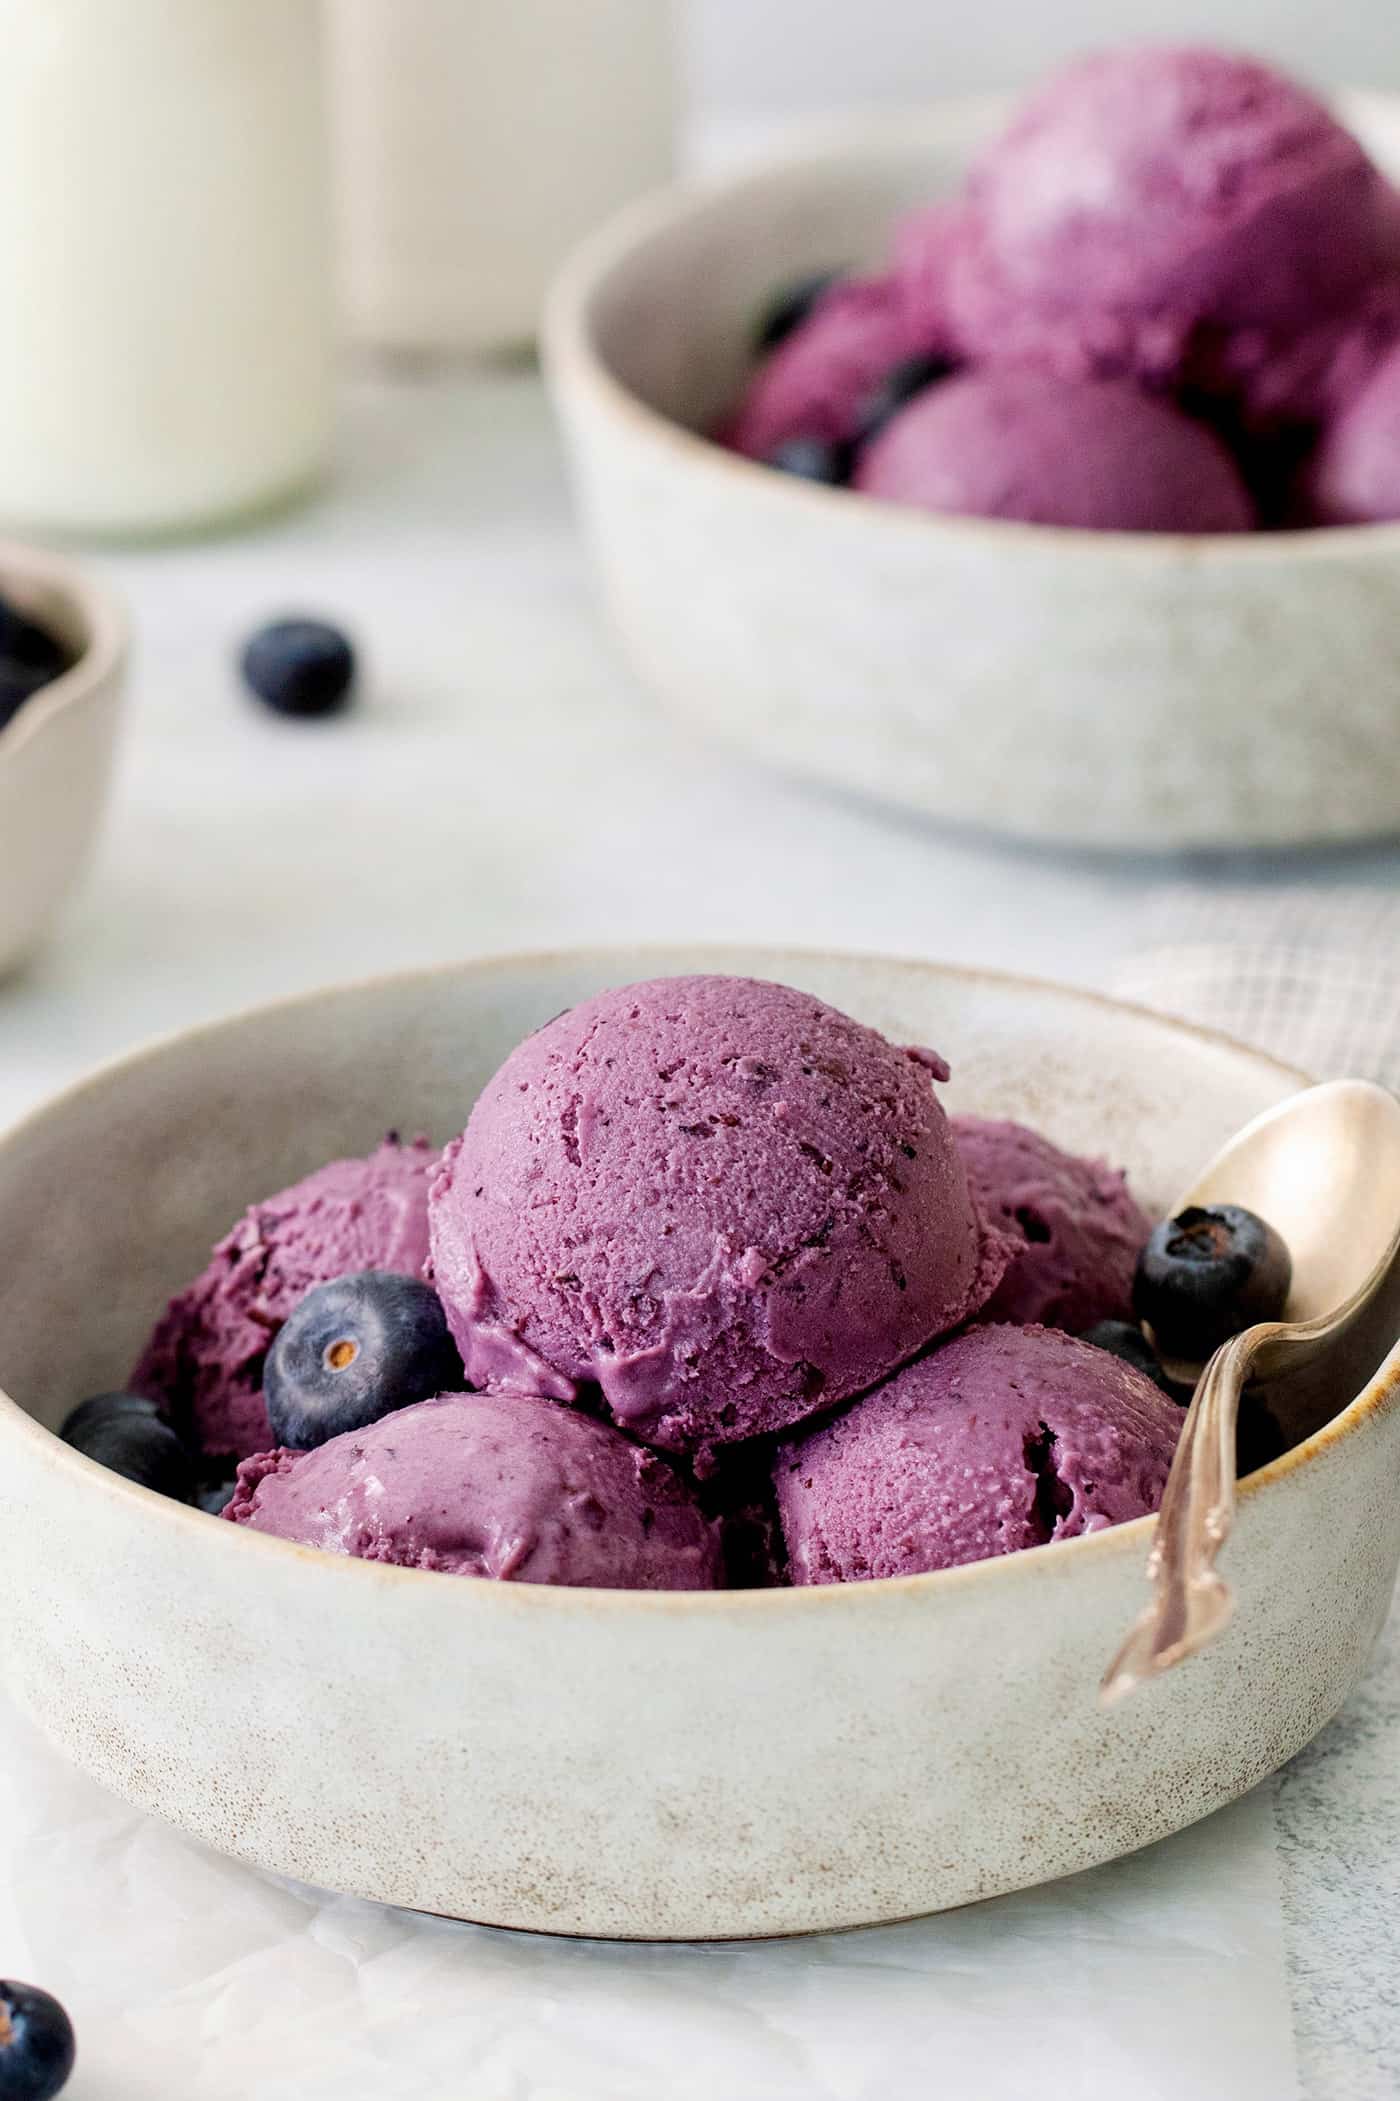 Scoops of blueberry ice cream in a white bowl.